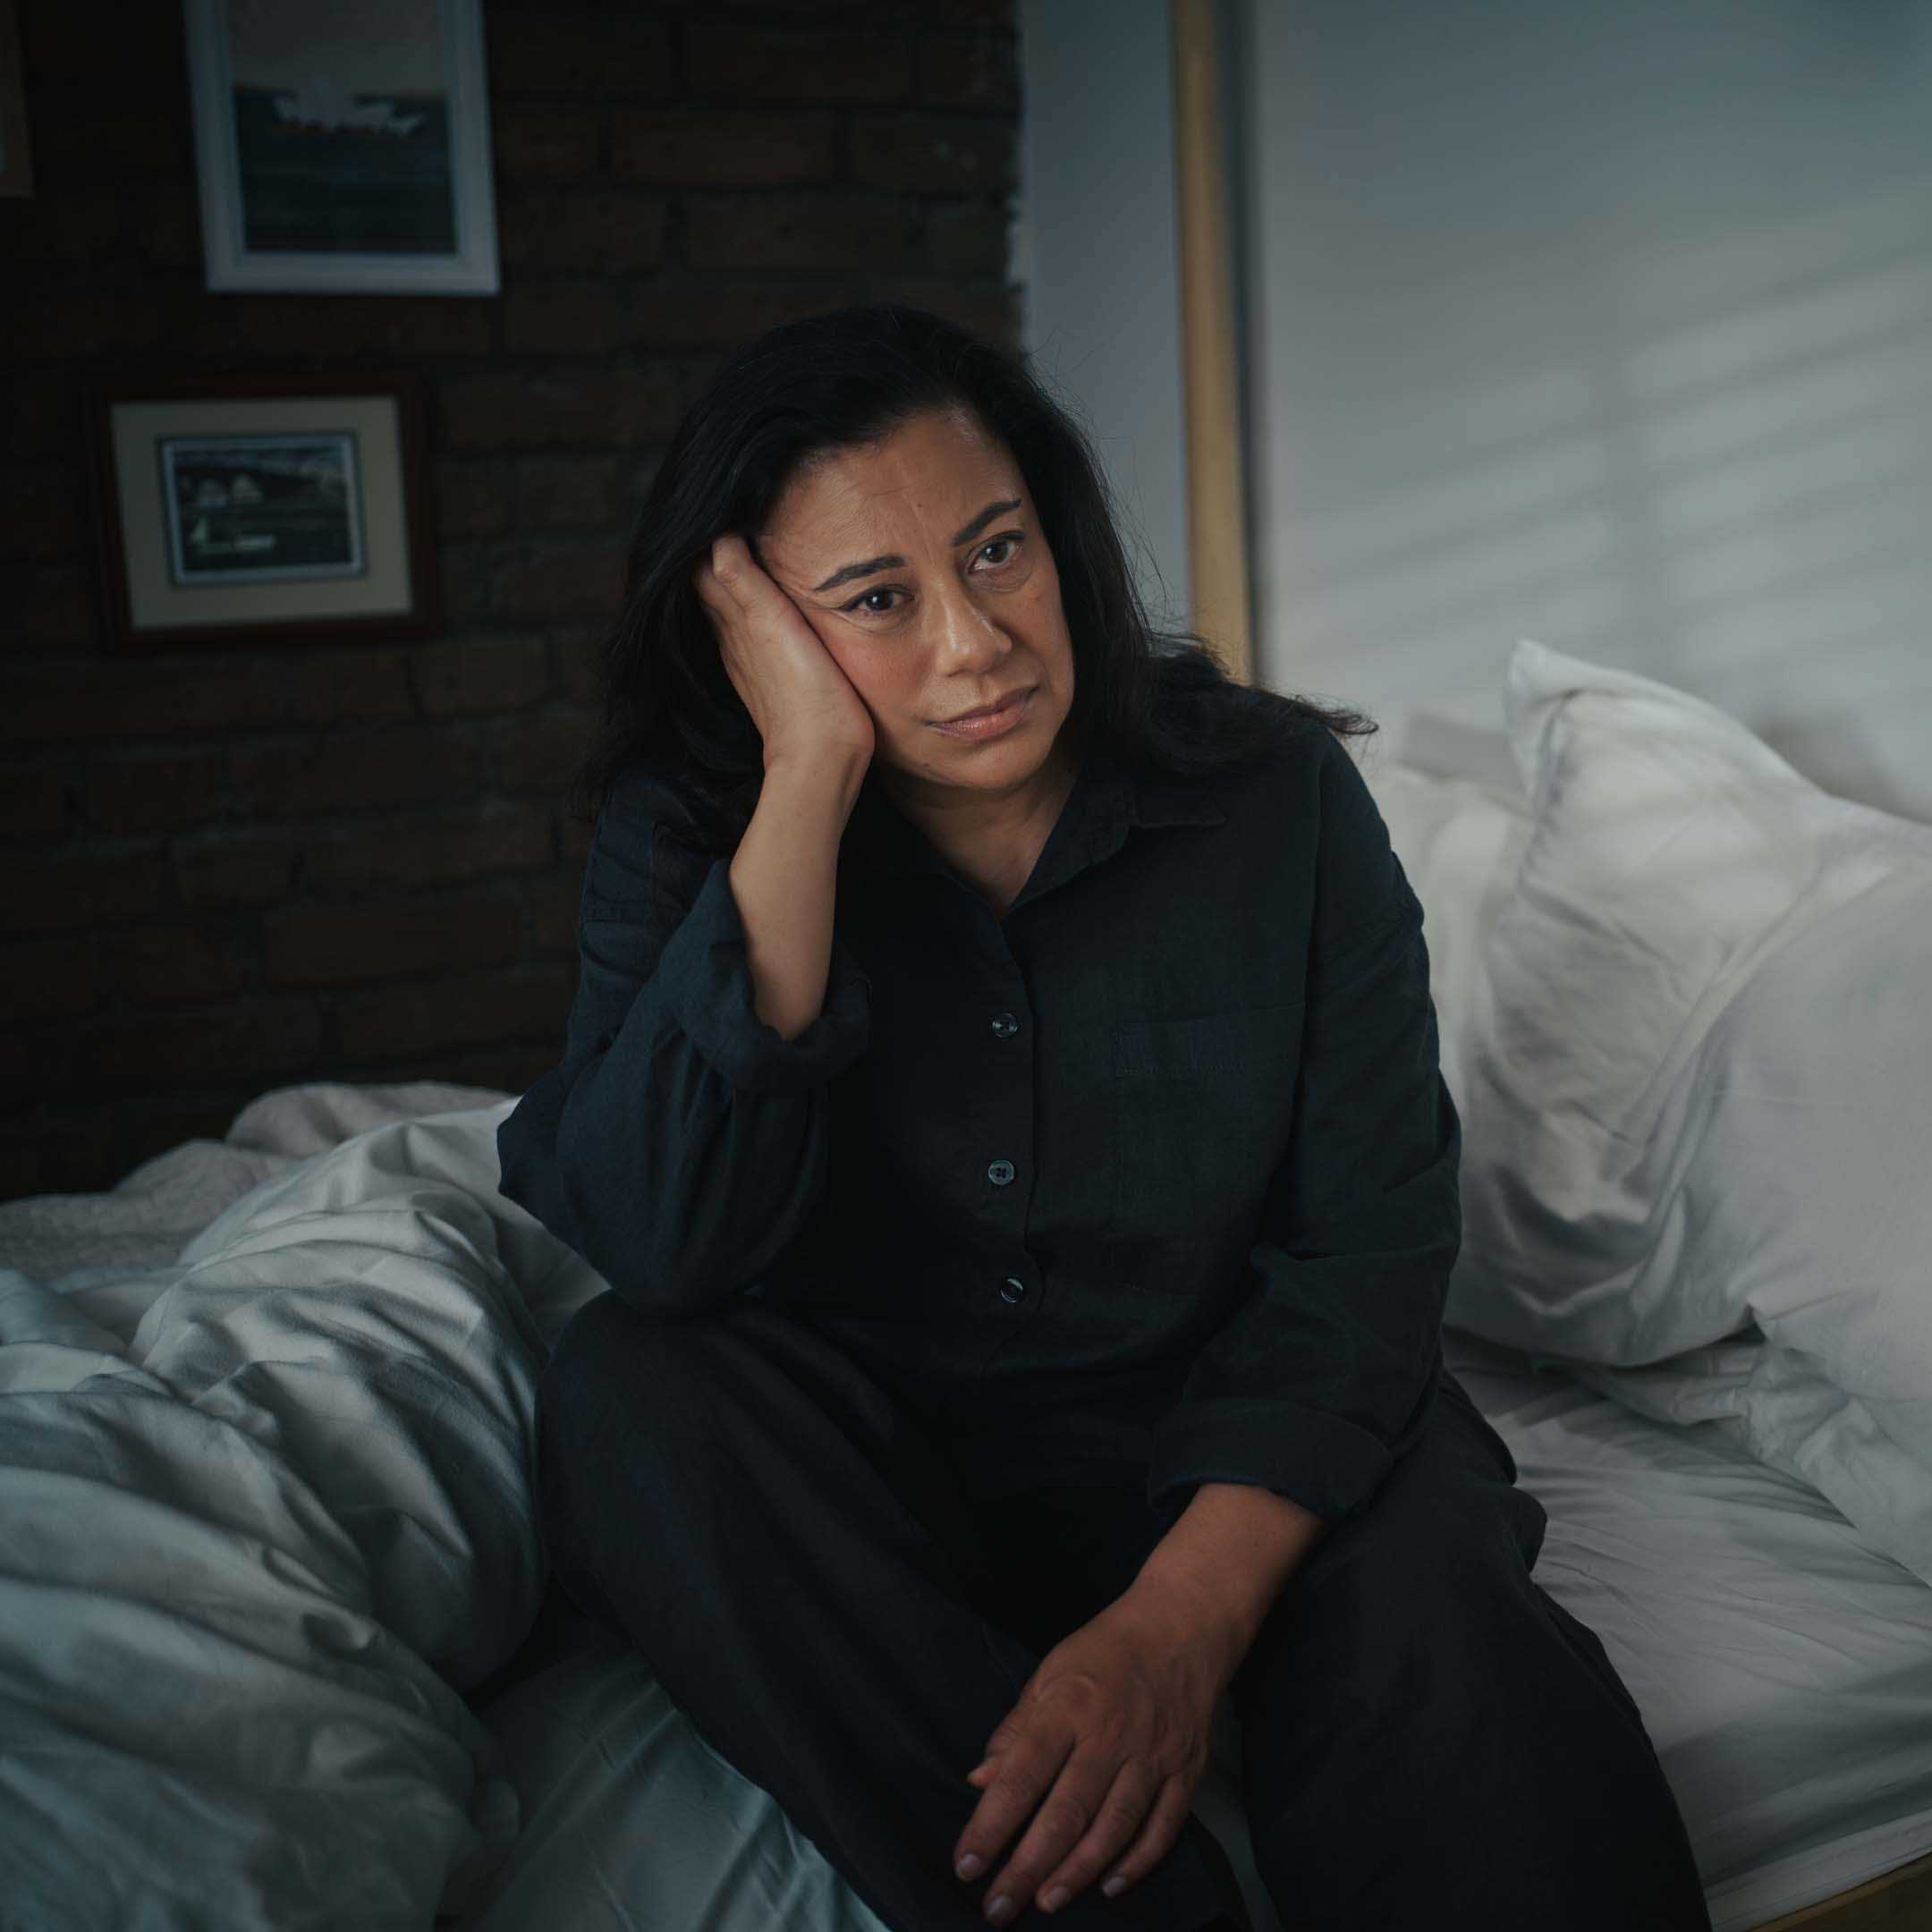 Woman sitting up in bed looking exhausted and sleep deprived